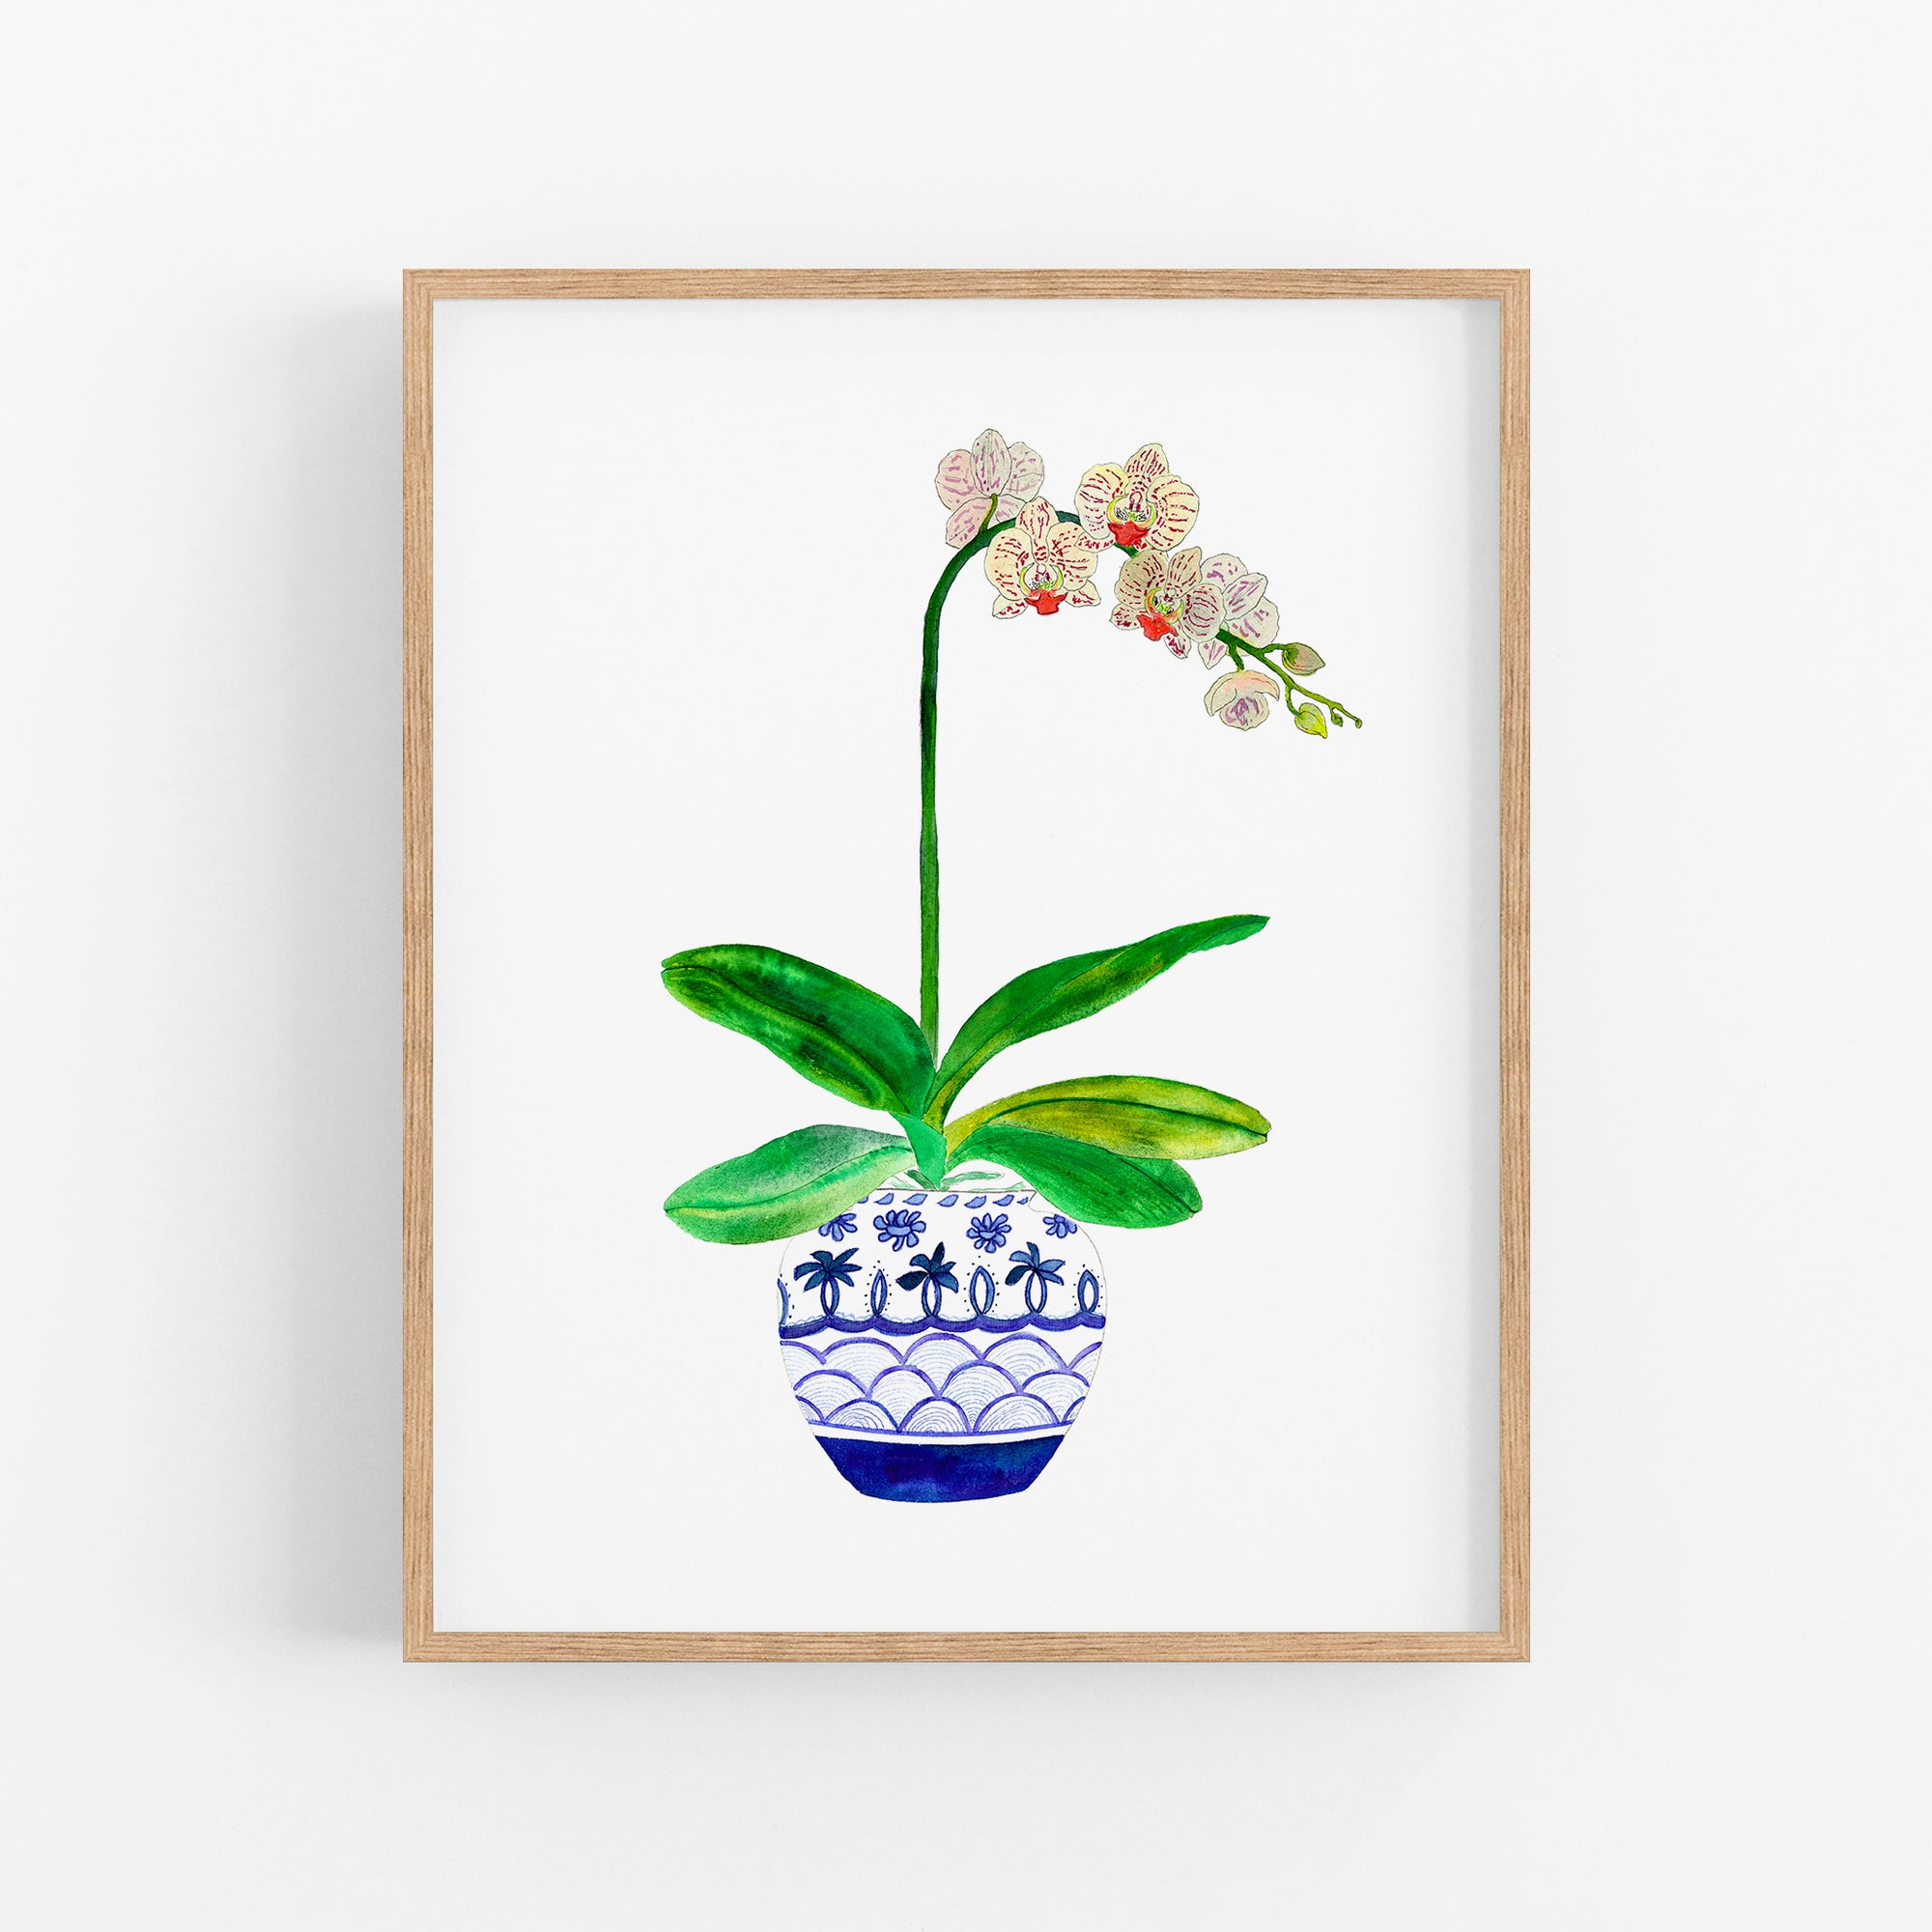 a painting of a flower in a blue and white vase